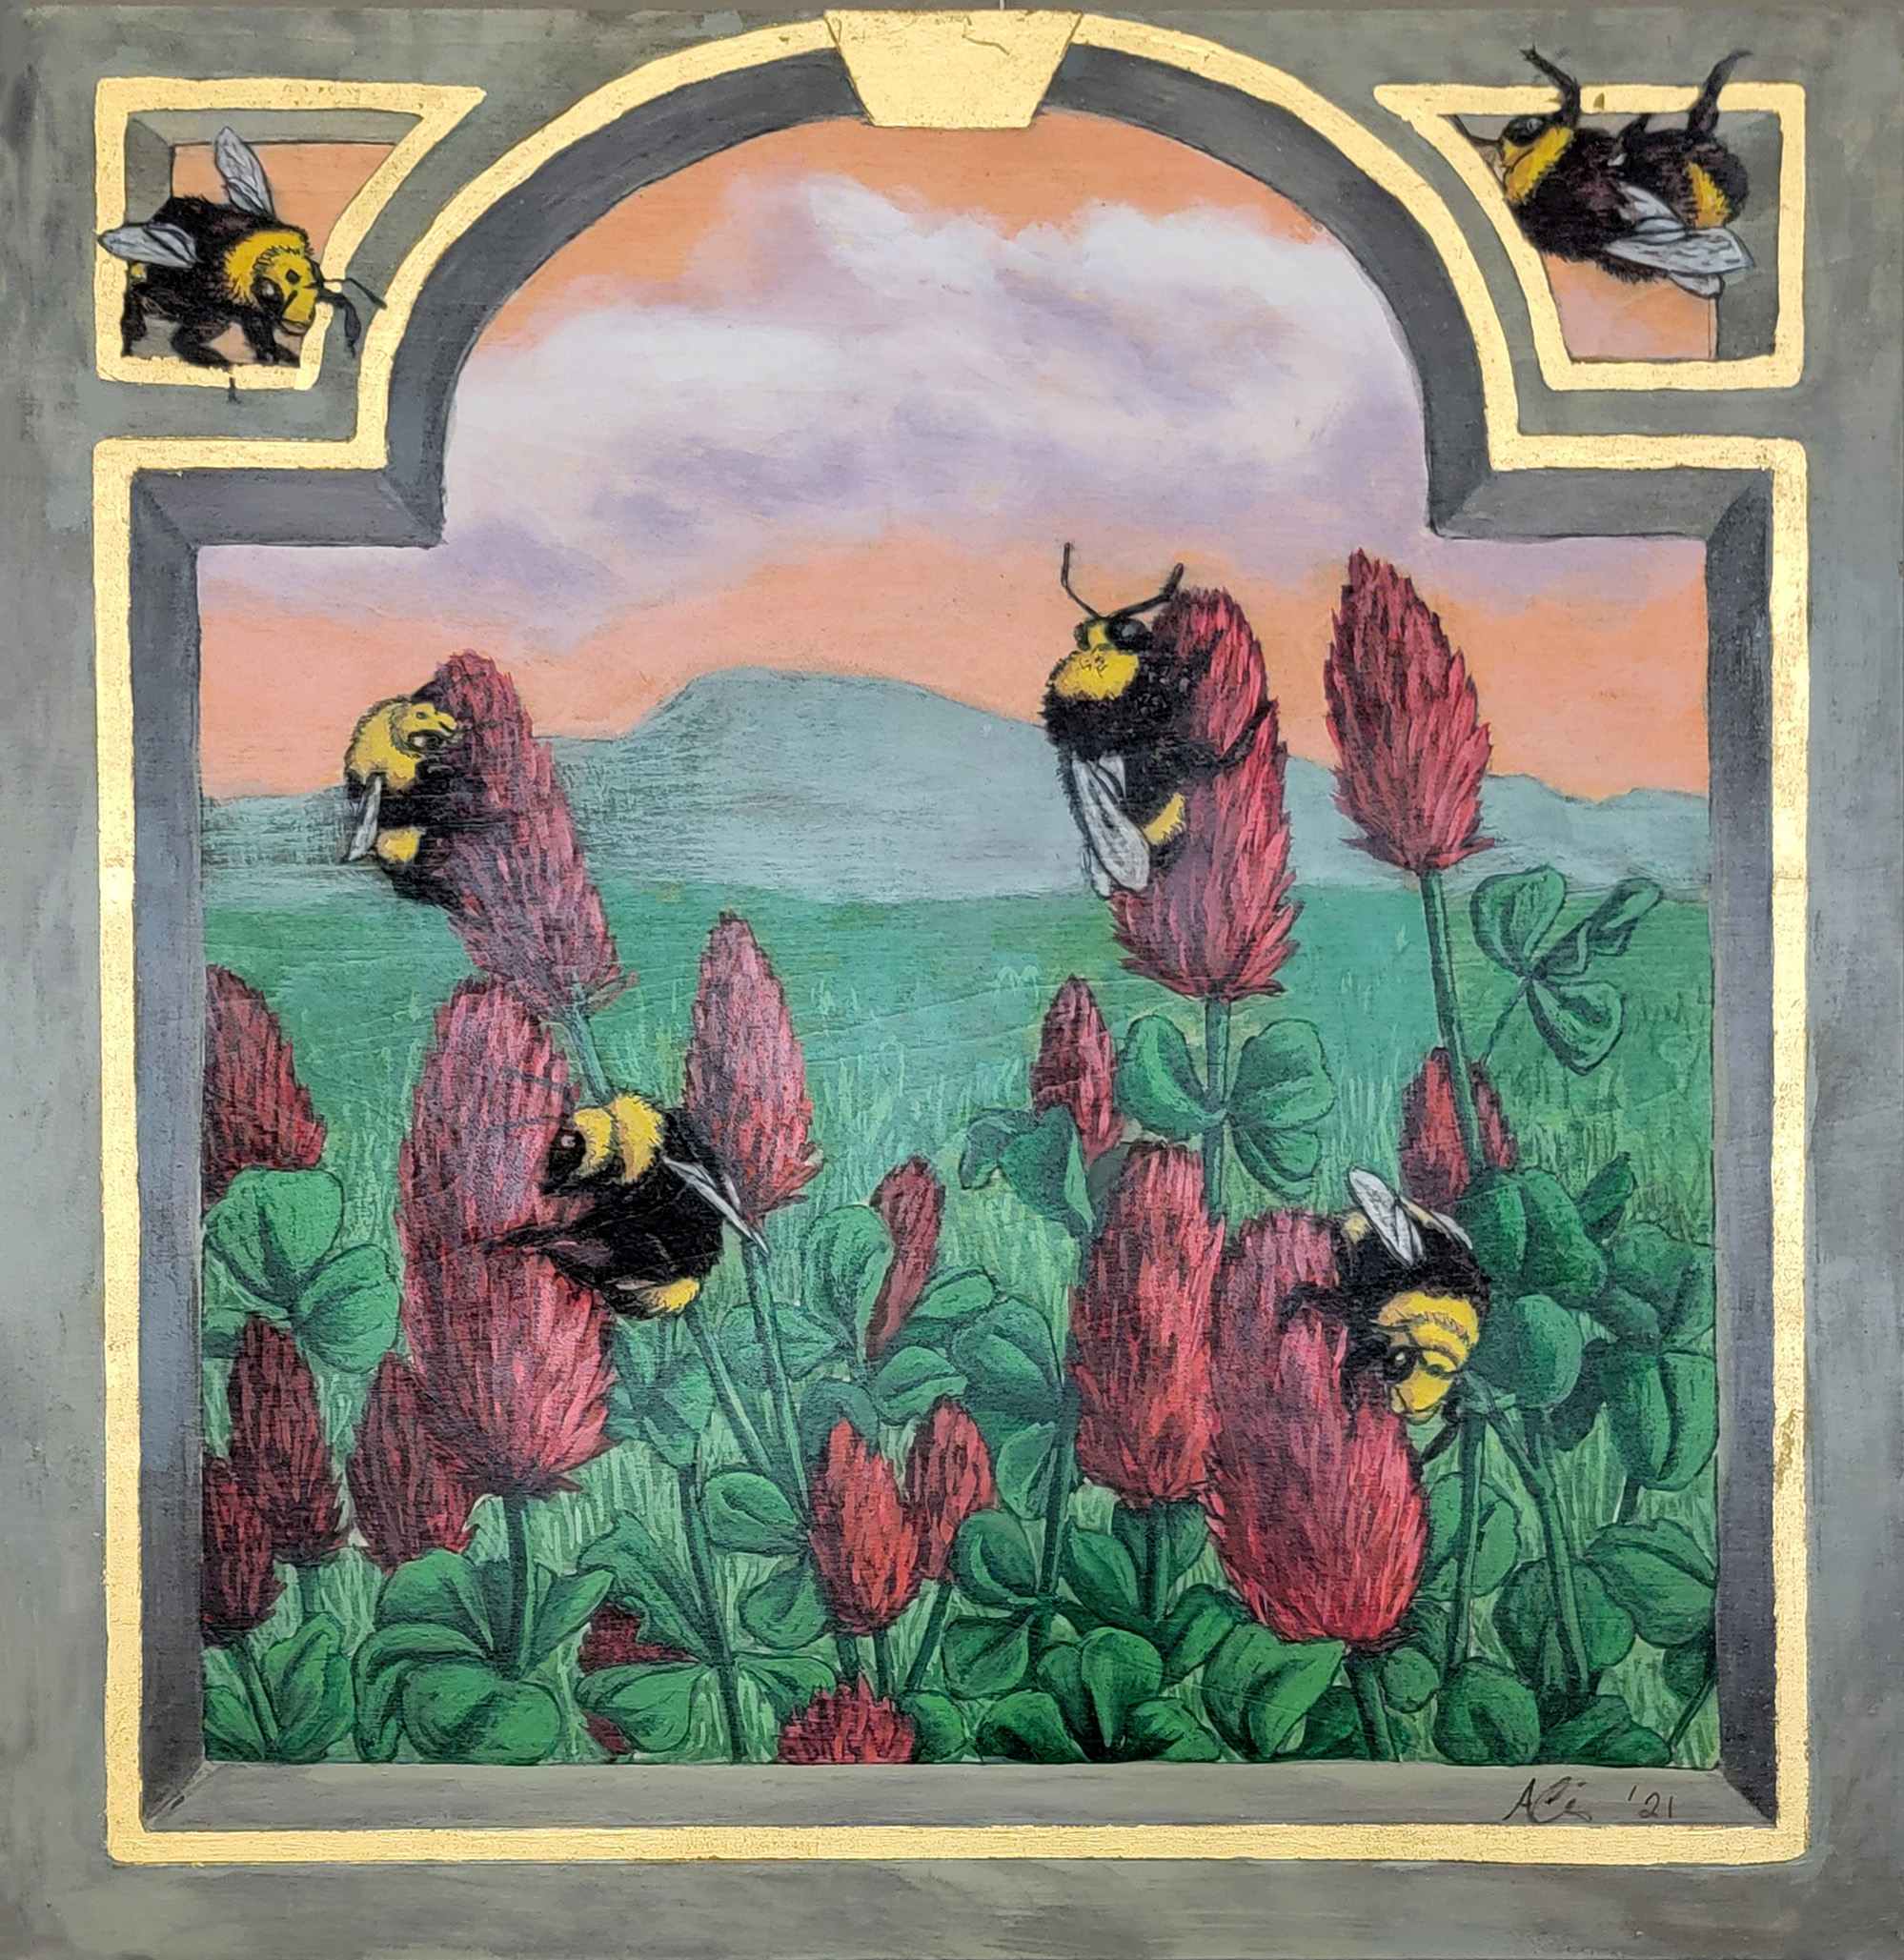 A picture of bees on flowers